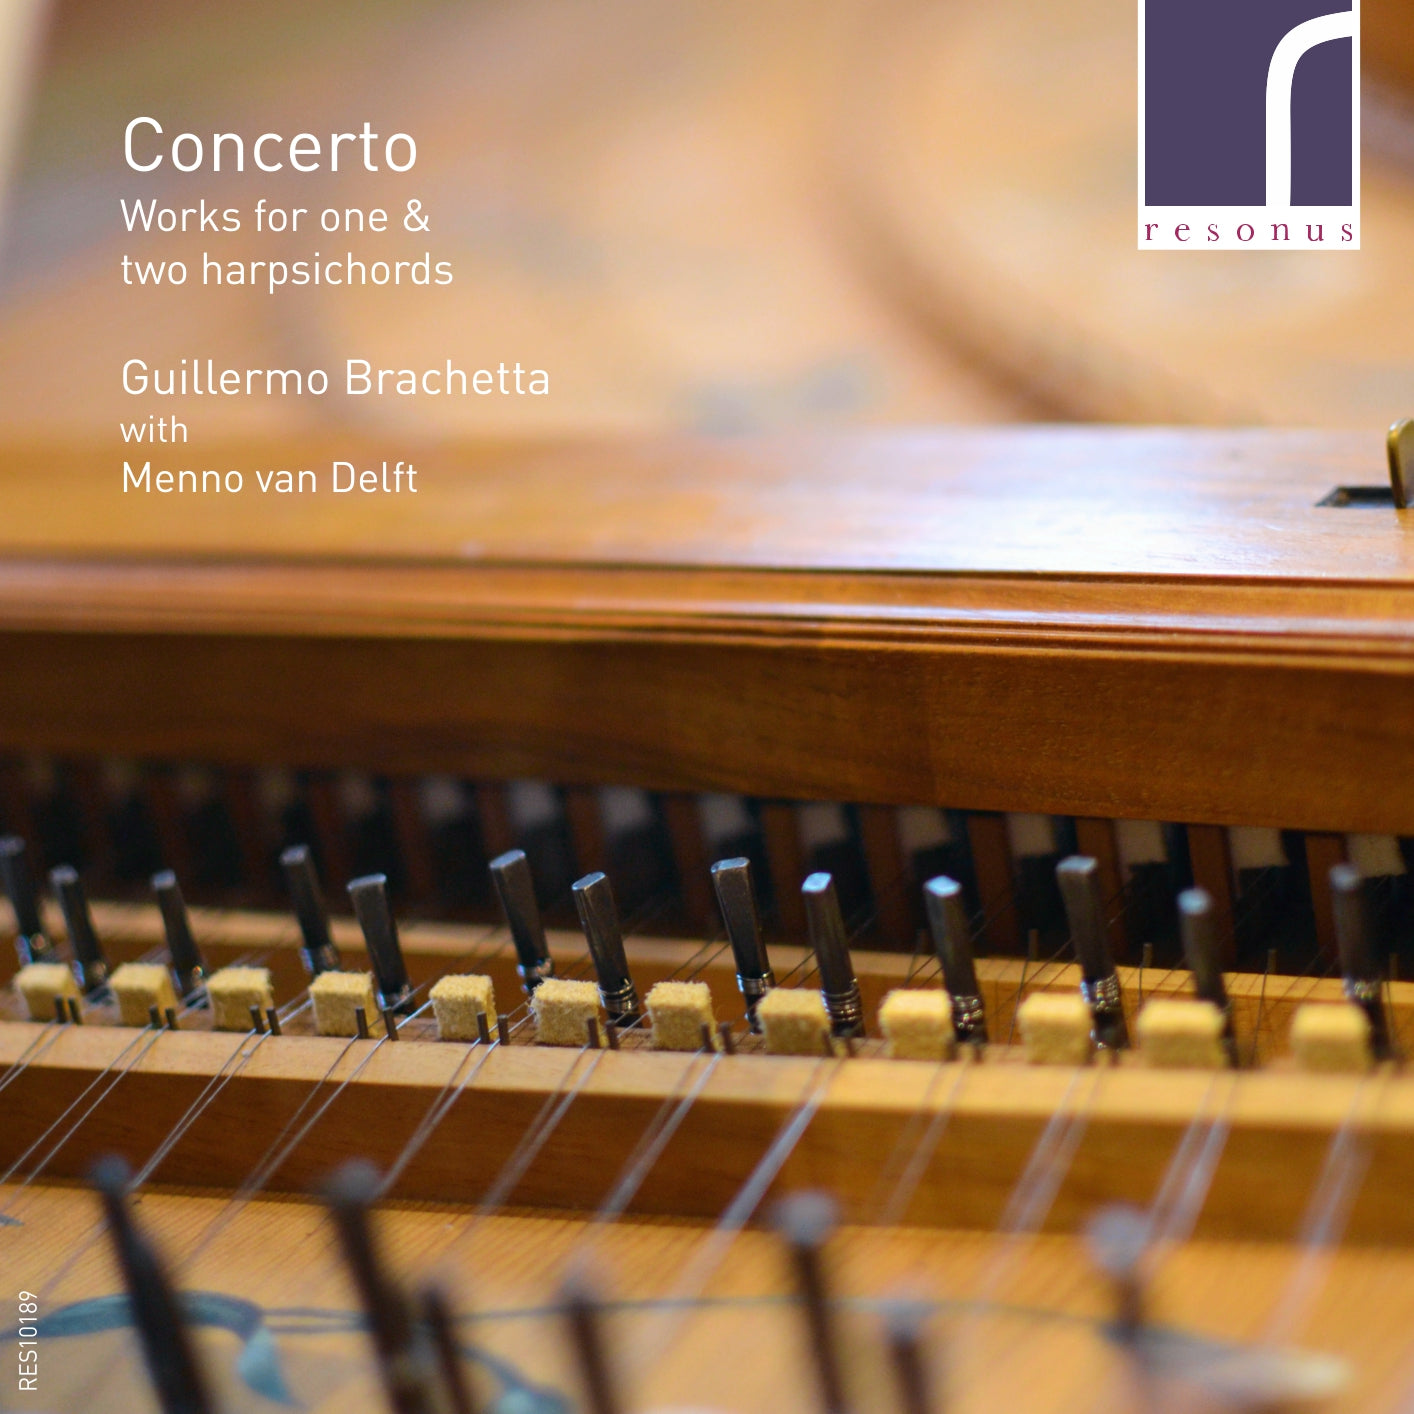 Concerto: Works for One & Two Harpsichords